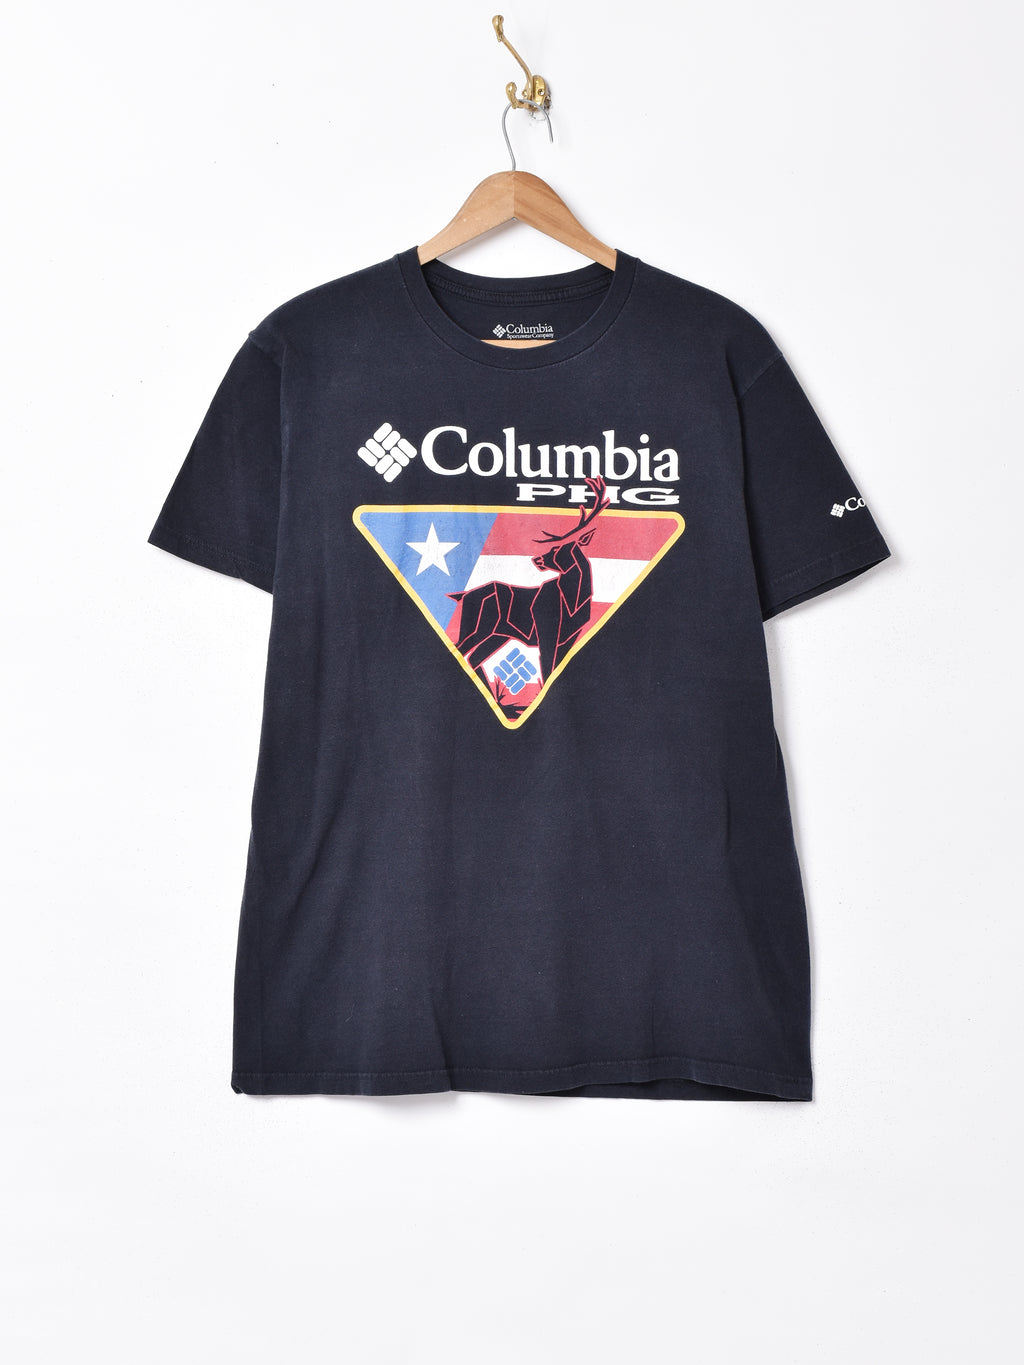 Columbia プリントTシャツ – 古着屋Top of the Hillのネット通販サイト